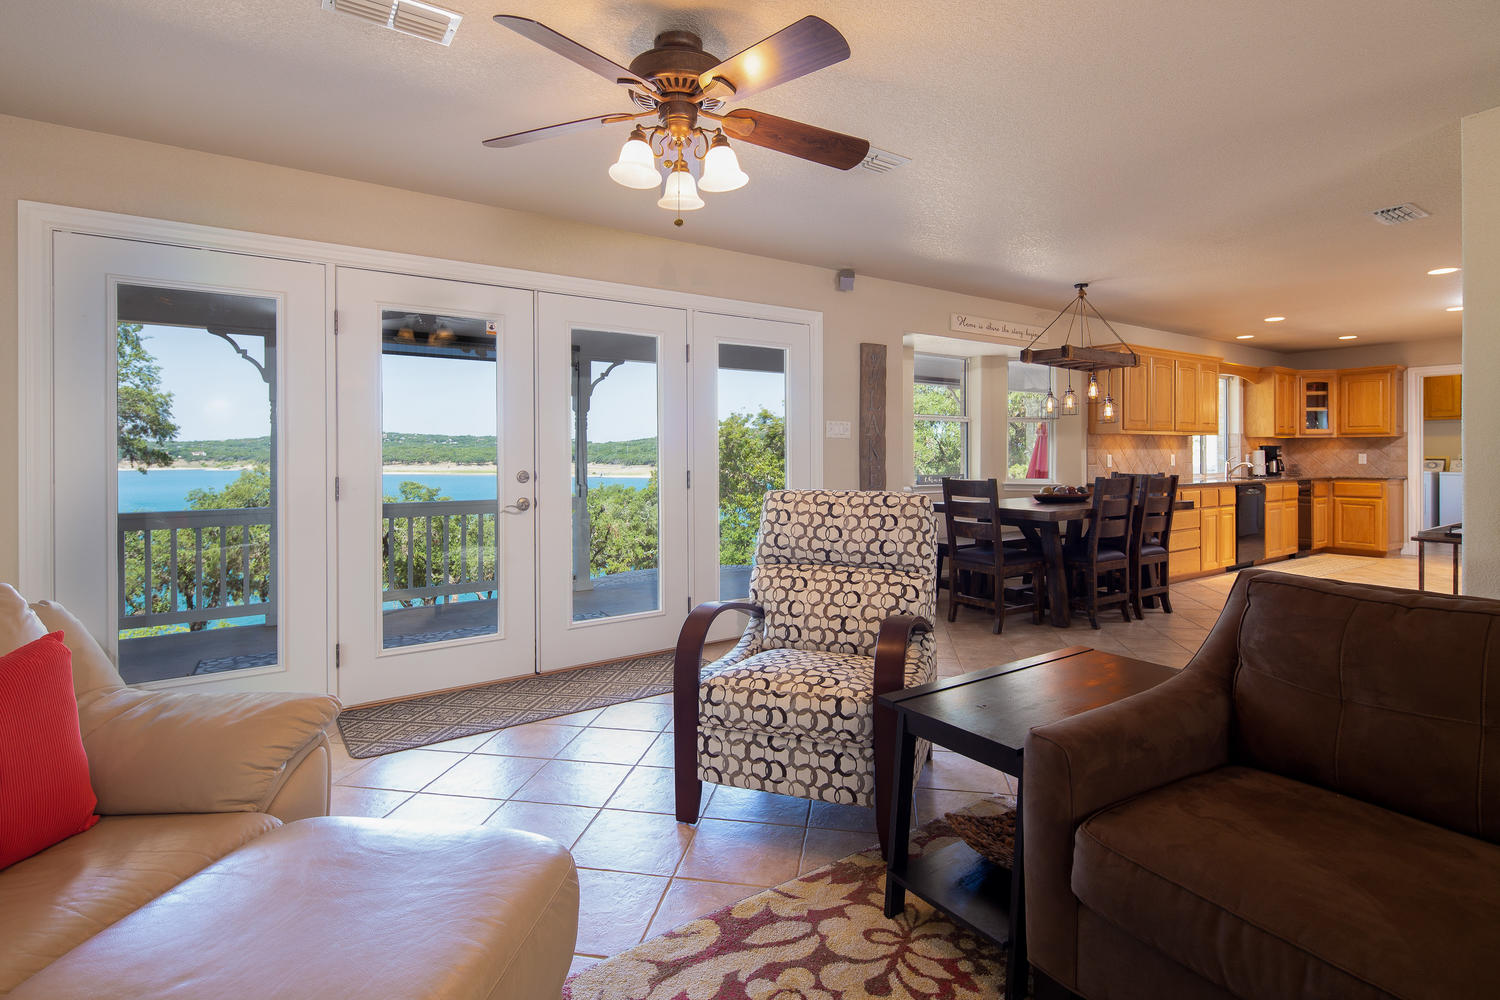 open dining room and kitchen also offer another opportunity to soak in the scenery! 